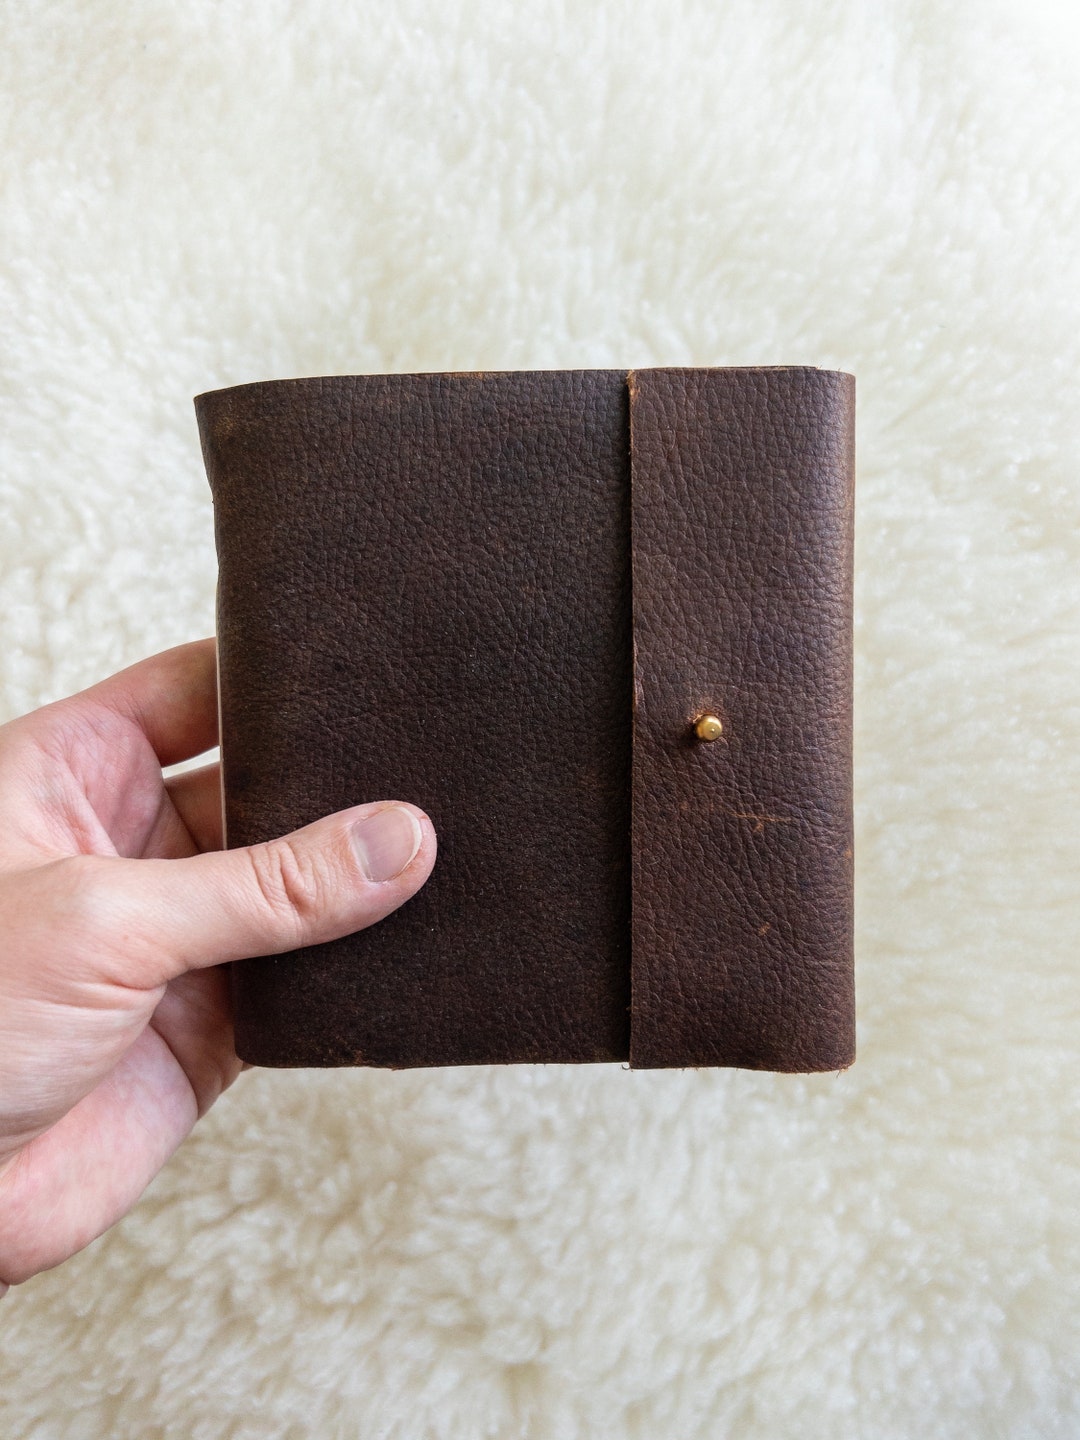 Handmade Leather A5 Sketchbook Cover, Vertical and Horizontal